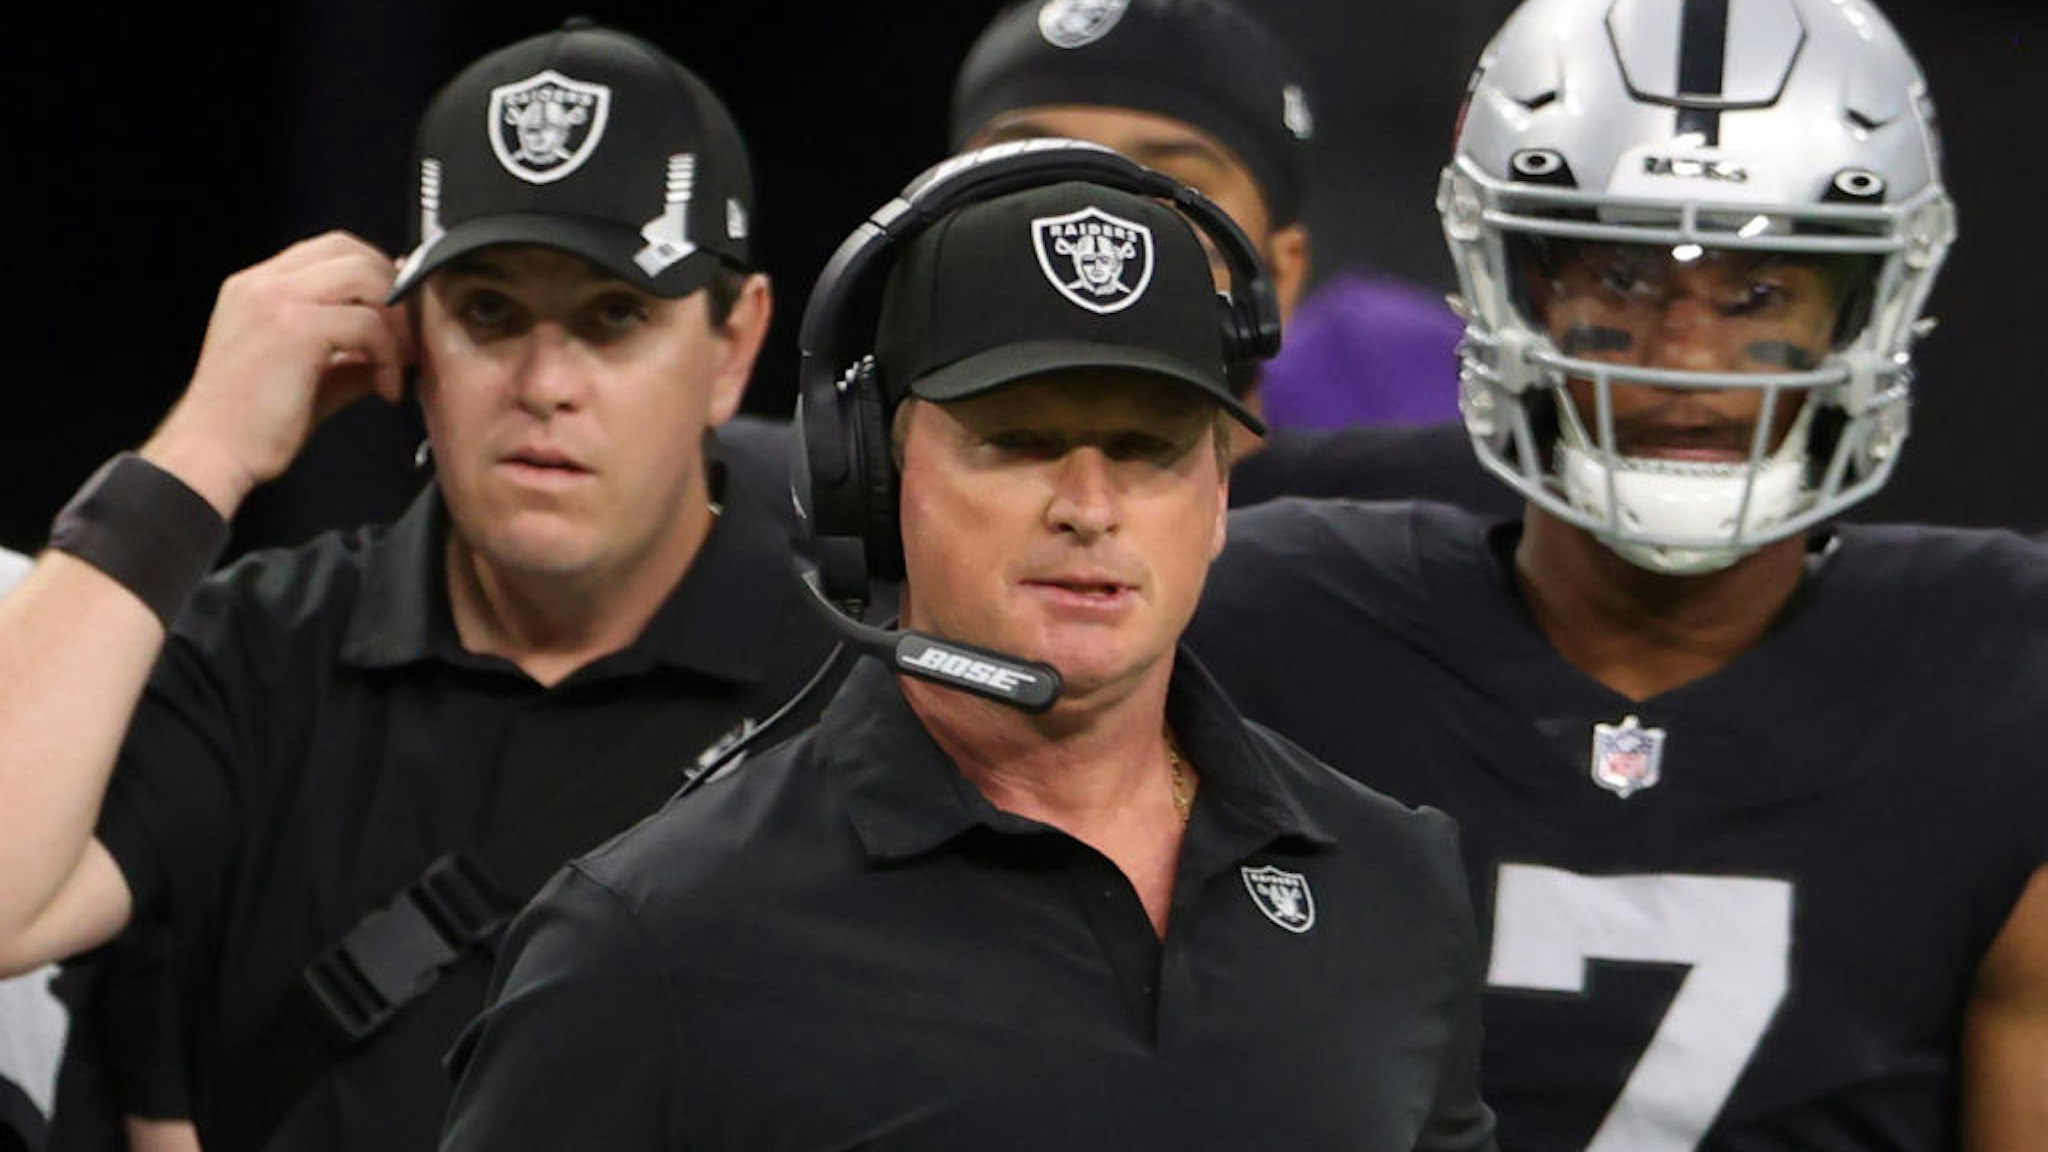 LAS VEGAS, NEVADA - SEPTEMBER 13: Head coach Jon Gruden of the Las Vegas Raiders looks on during the first quarter against the Baltimore Ravens at Allegiant Stadium on September 13, 2021 in Las Vegas, Nevada. (Photo by Christian Petersen/Getty Images)